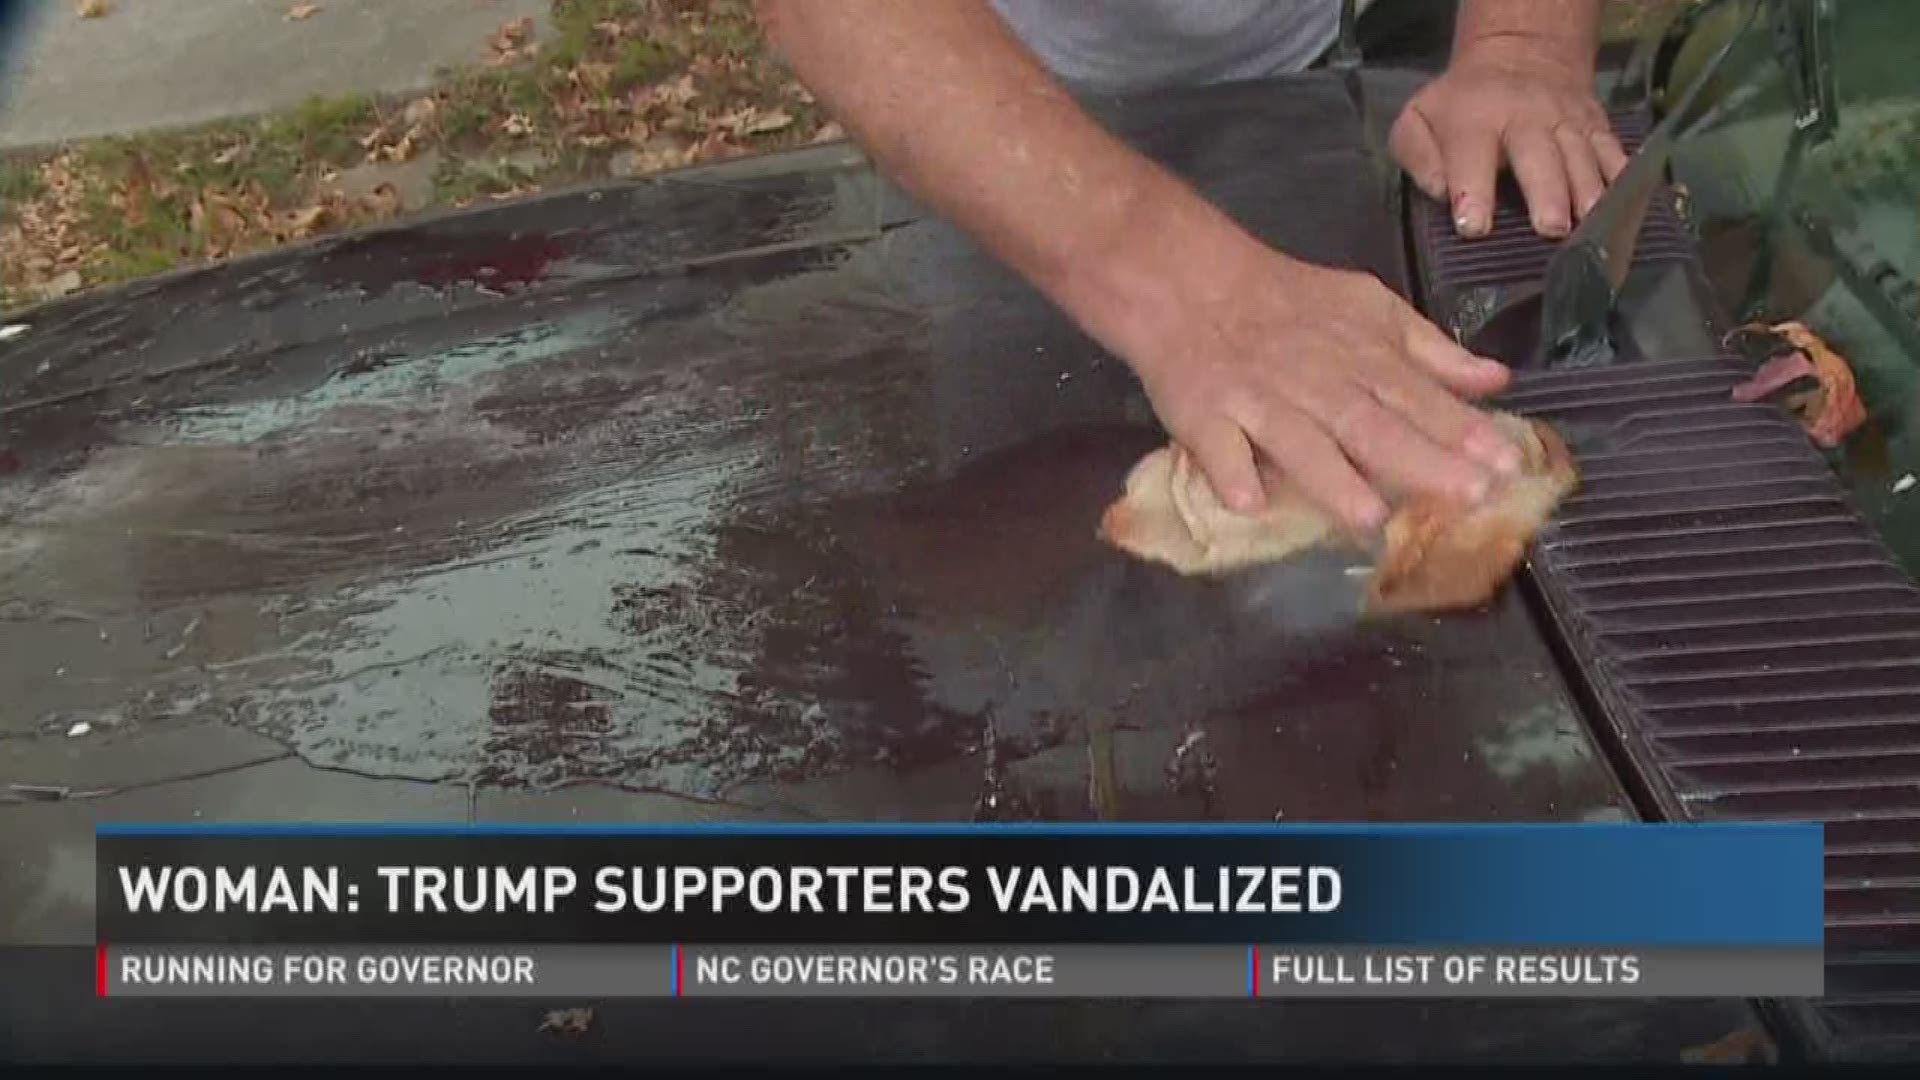 Trump supporters car vandalized.